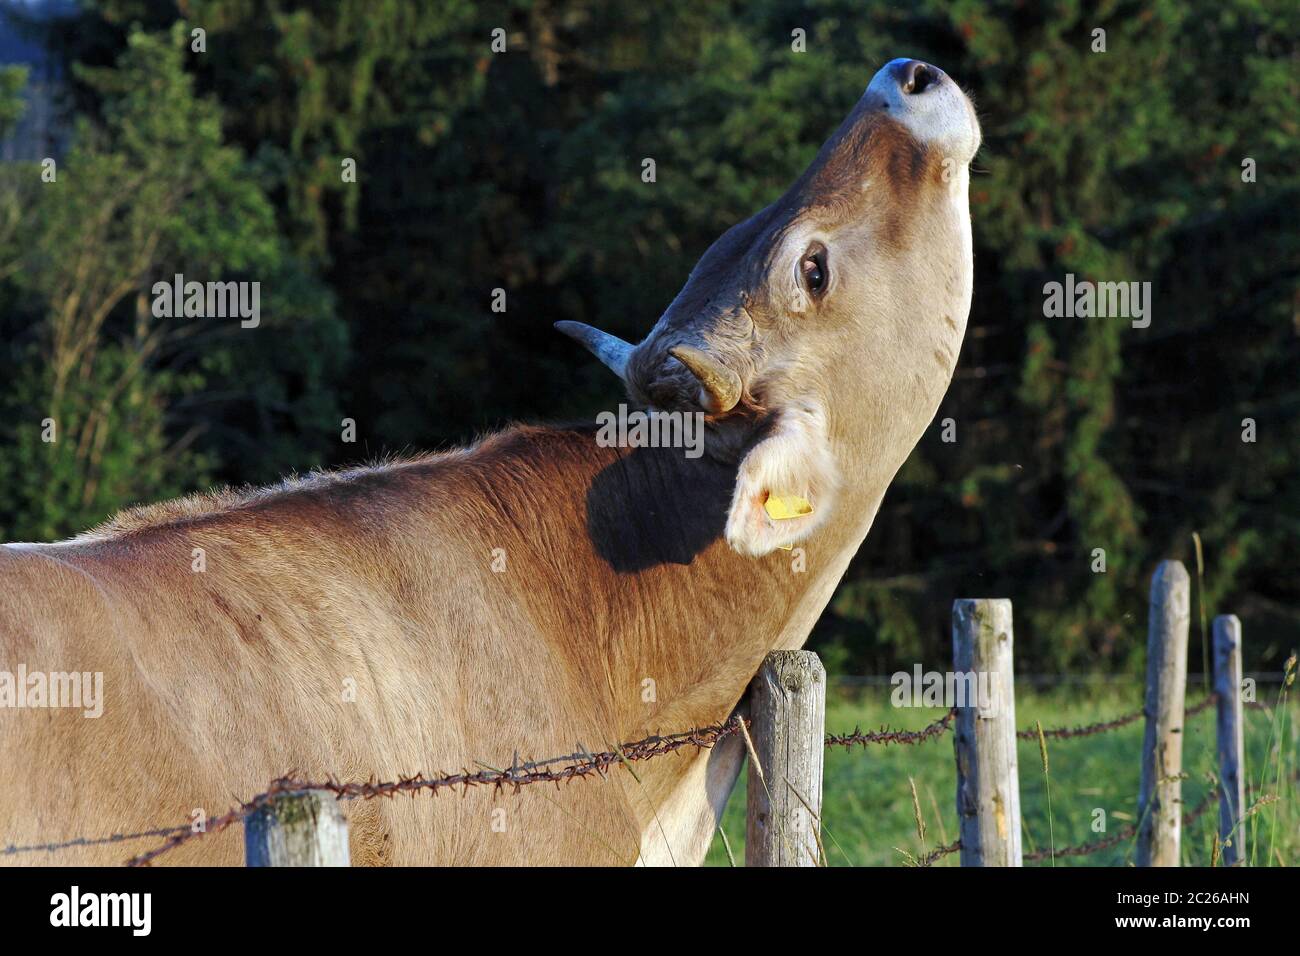 A young cow scratches its neck on a wooden post with relish Stock Photo